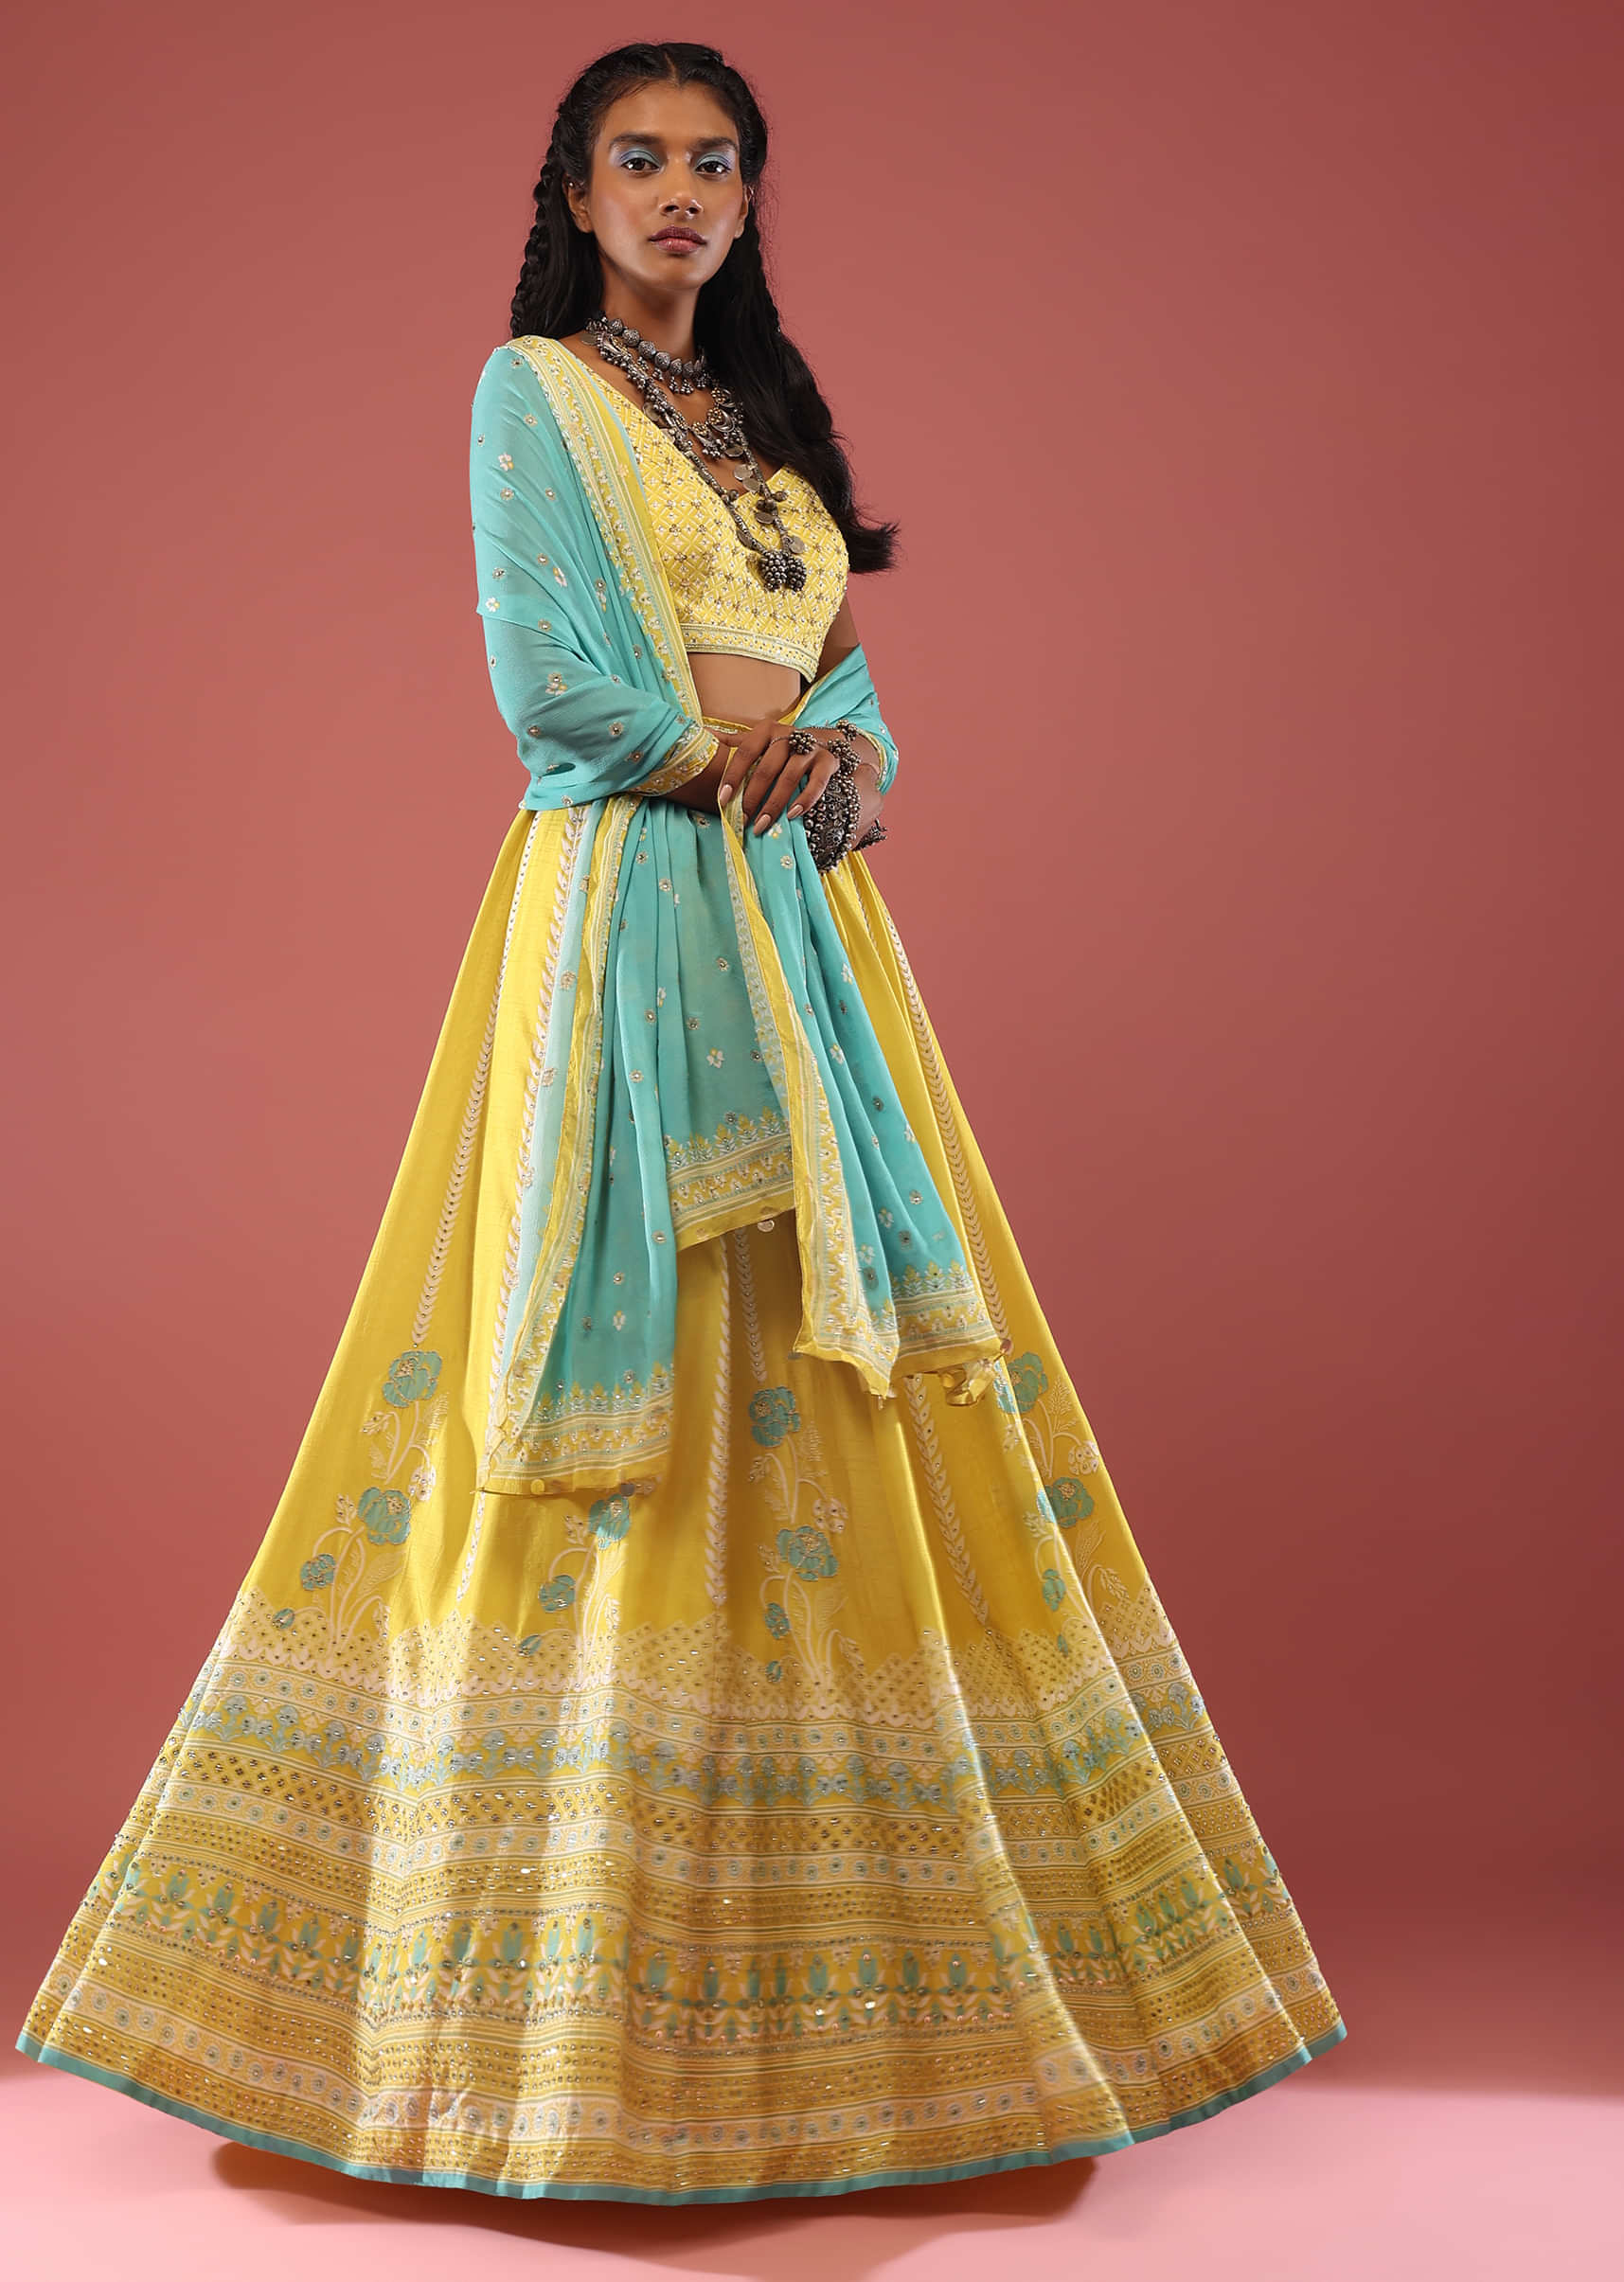 Lemon Yellow Lehenga With Floral Print And A Well-Embroidered Silk Blouse Are Paired With A Blue Chiffon Dupatta